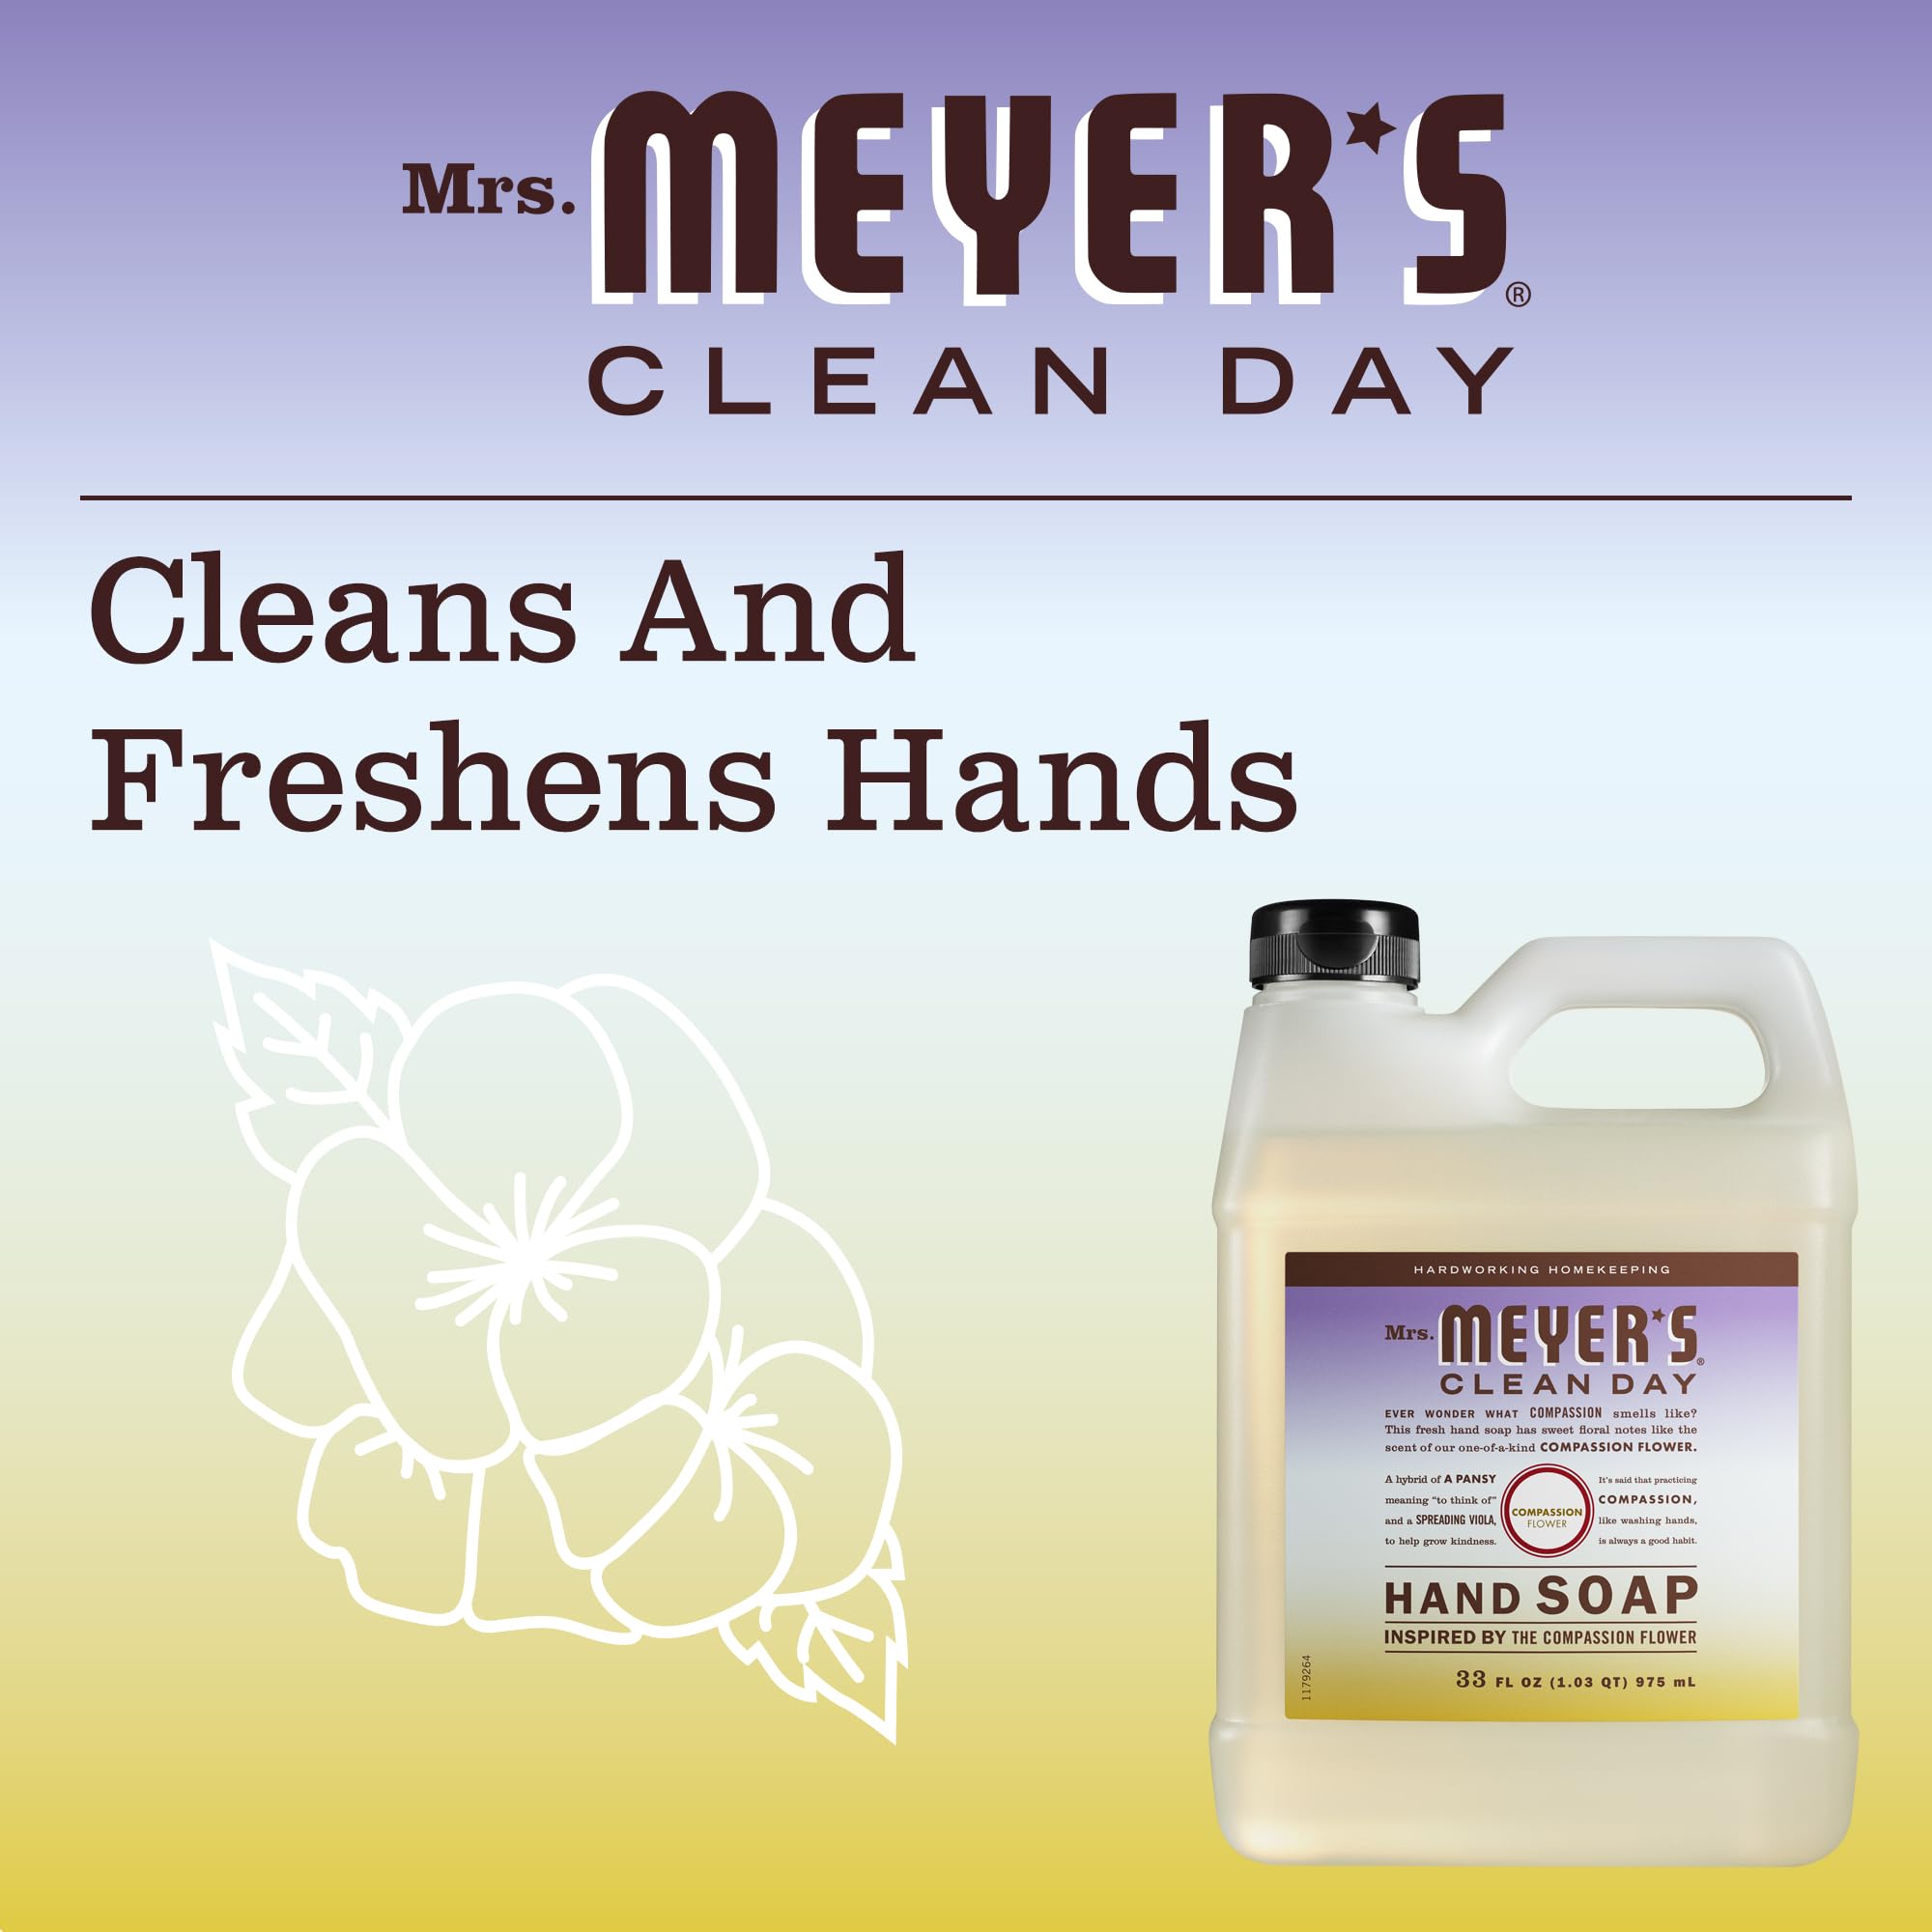 MRS MEYER’S CLEANDAY Hand Soap Refill, Made with Essential Oils, Biodegradable Formula, Compassion Flower, 33 fl. oz